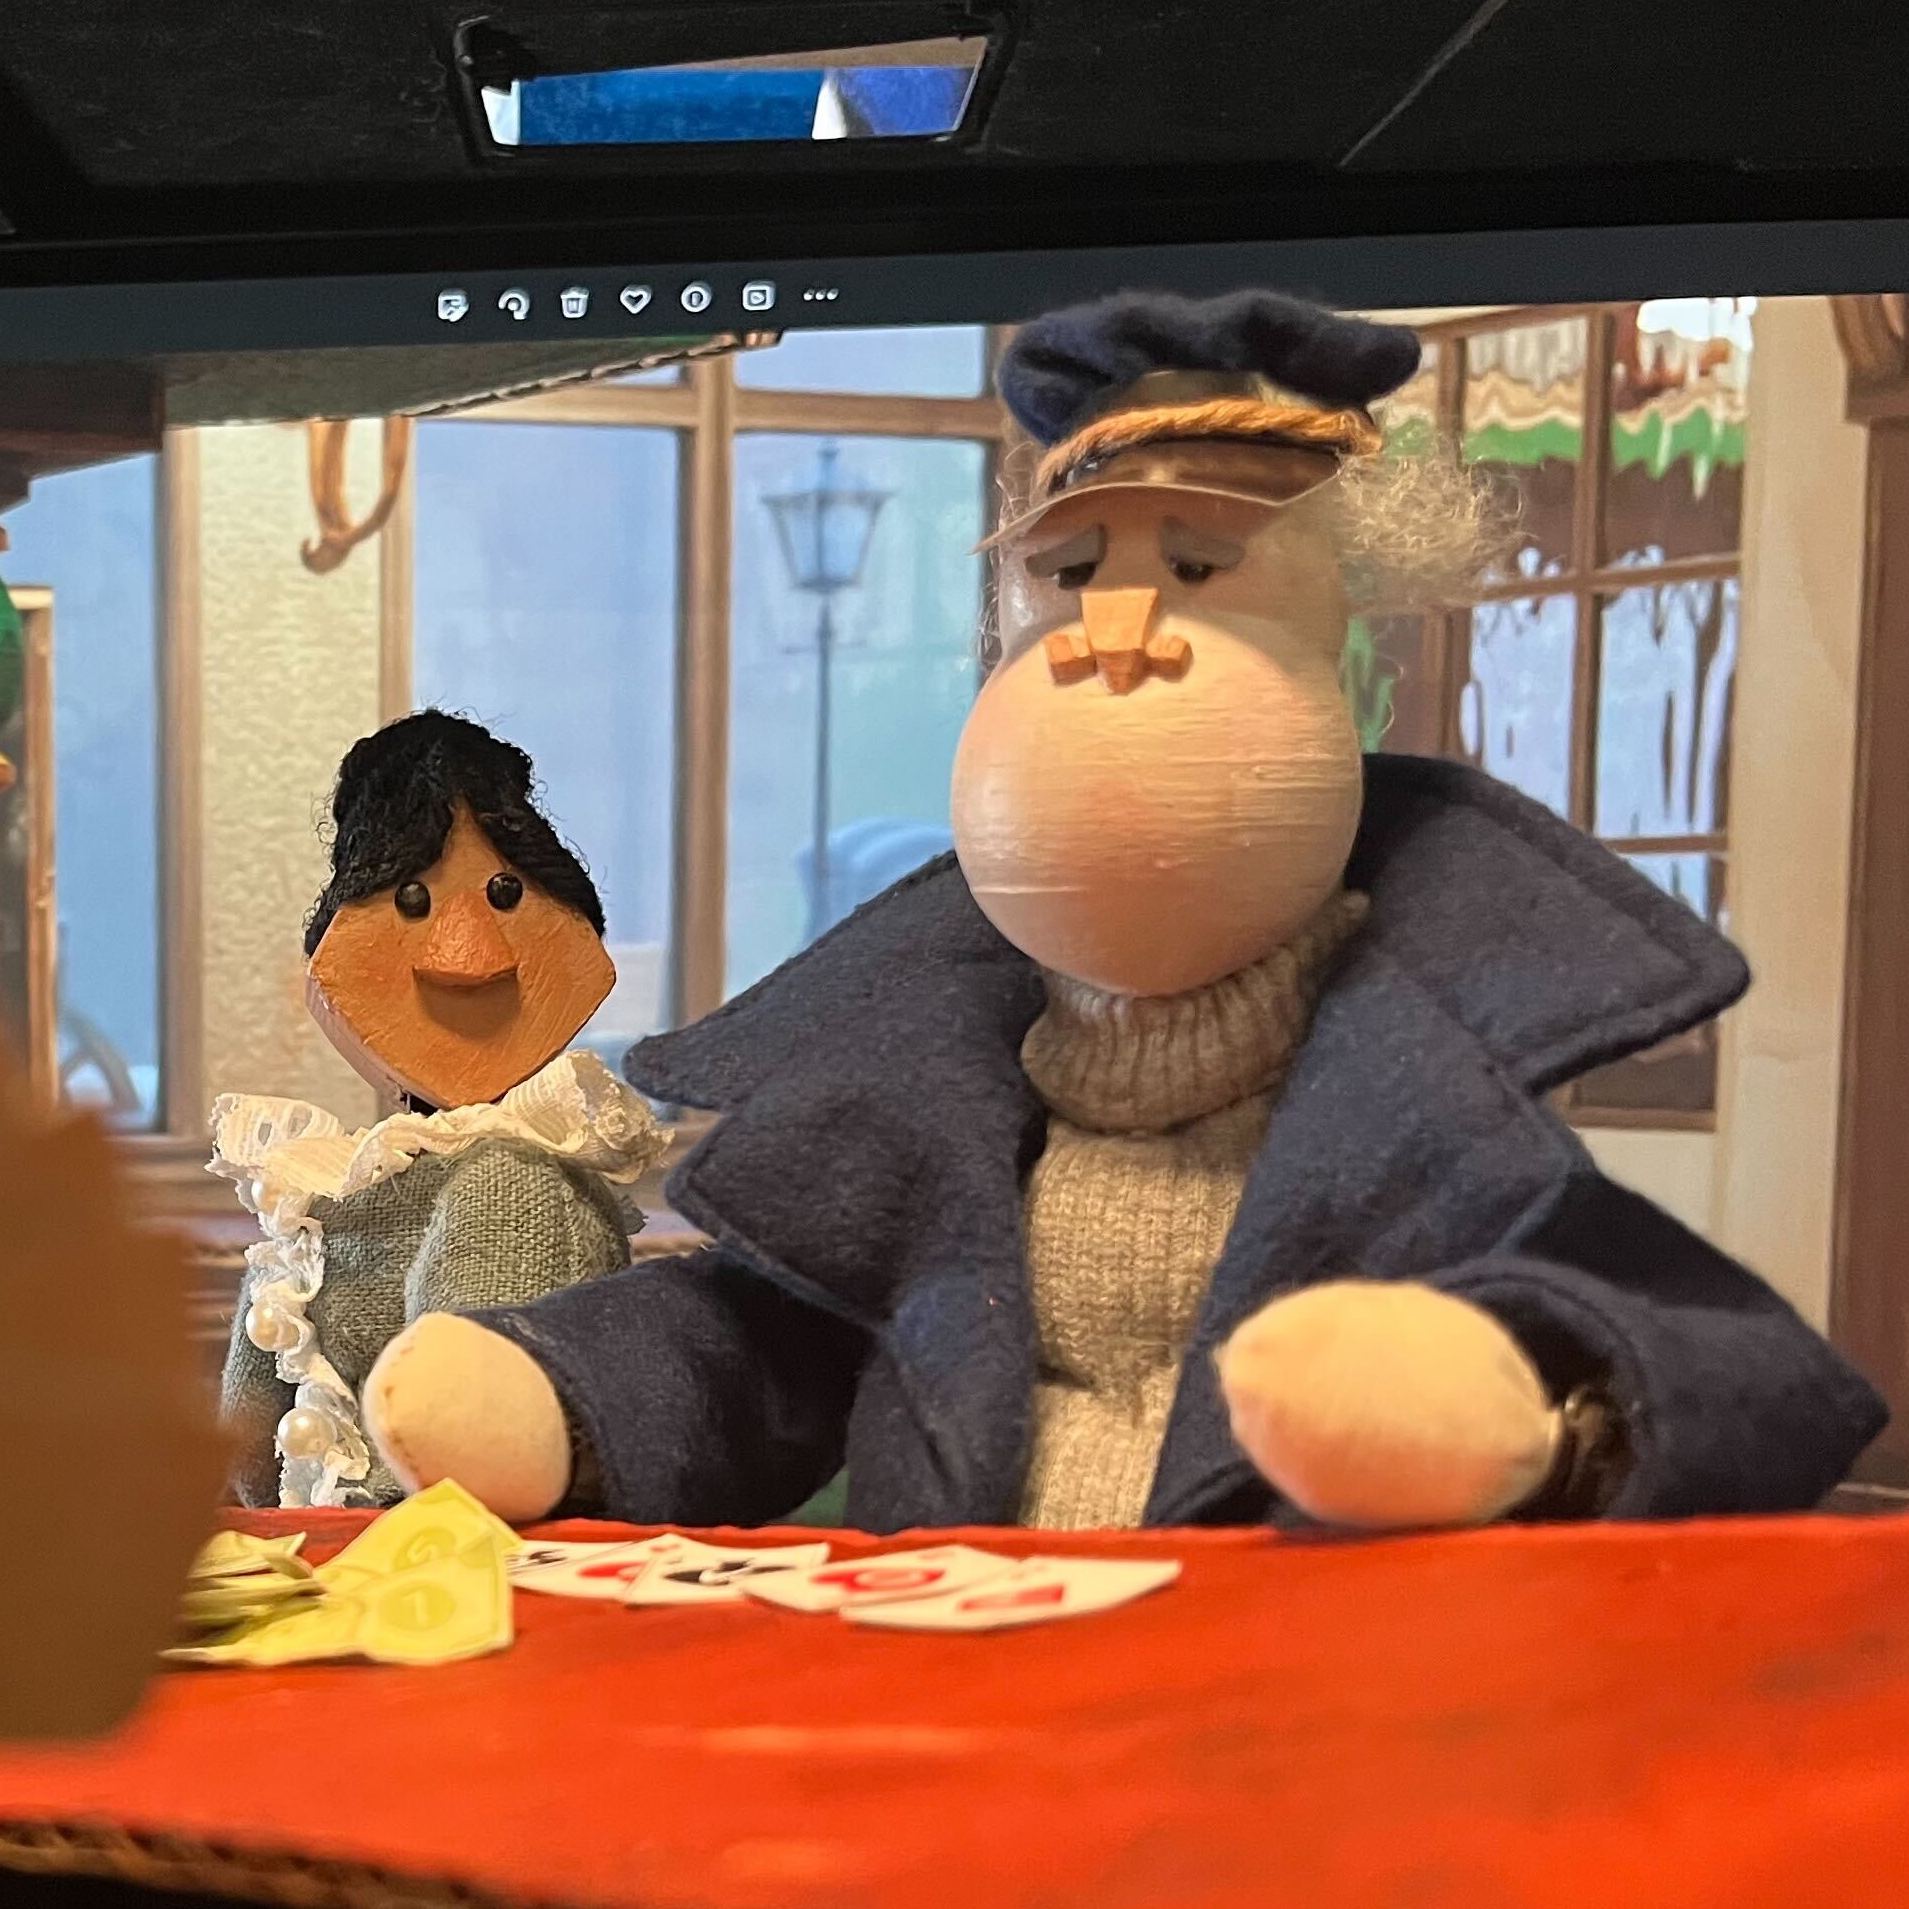 Two humanoid puppets sit at a table. The nearer one is dressed as a ship captain with wool sweater and a dark blue coat. The one in back wears a Victorian dress with lace. Link takes you to project page.